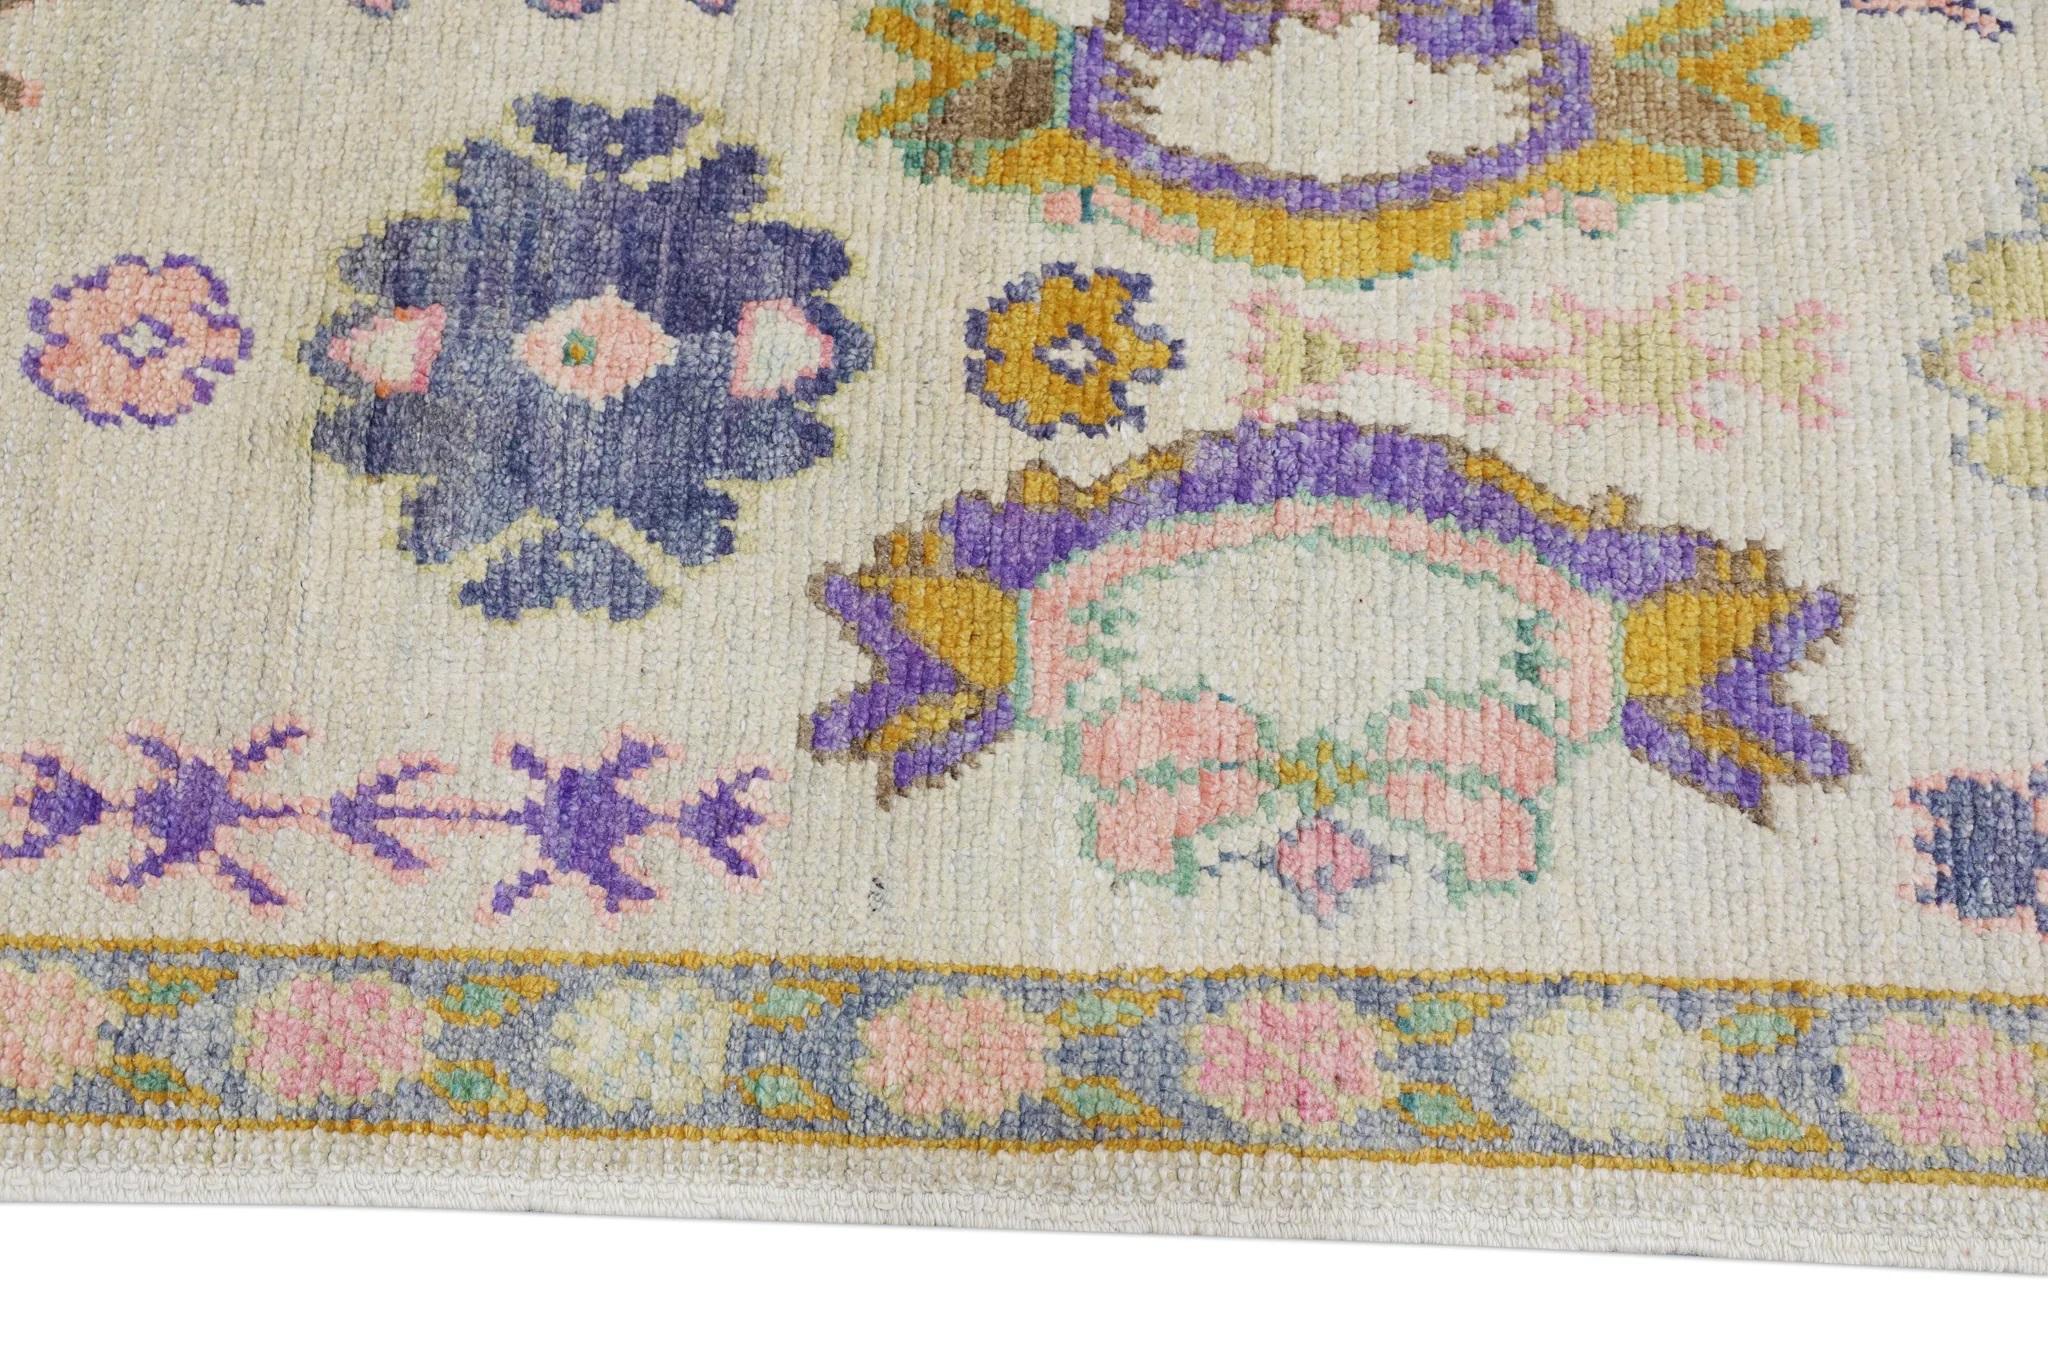 Colorful Floral Pattern Turkish Oushak Rug made with Handwoven Wool 2'9